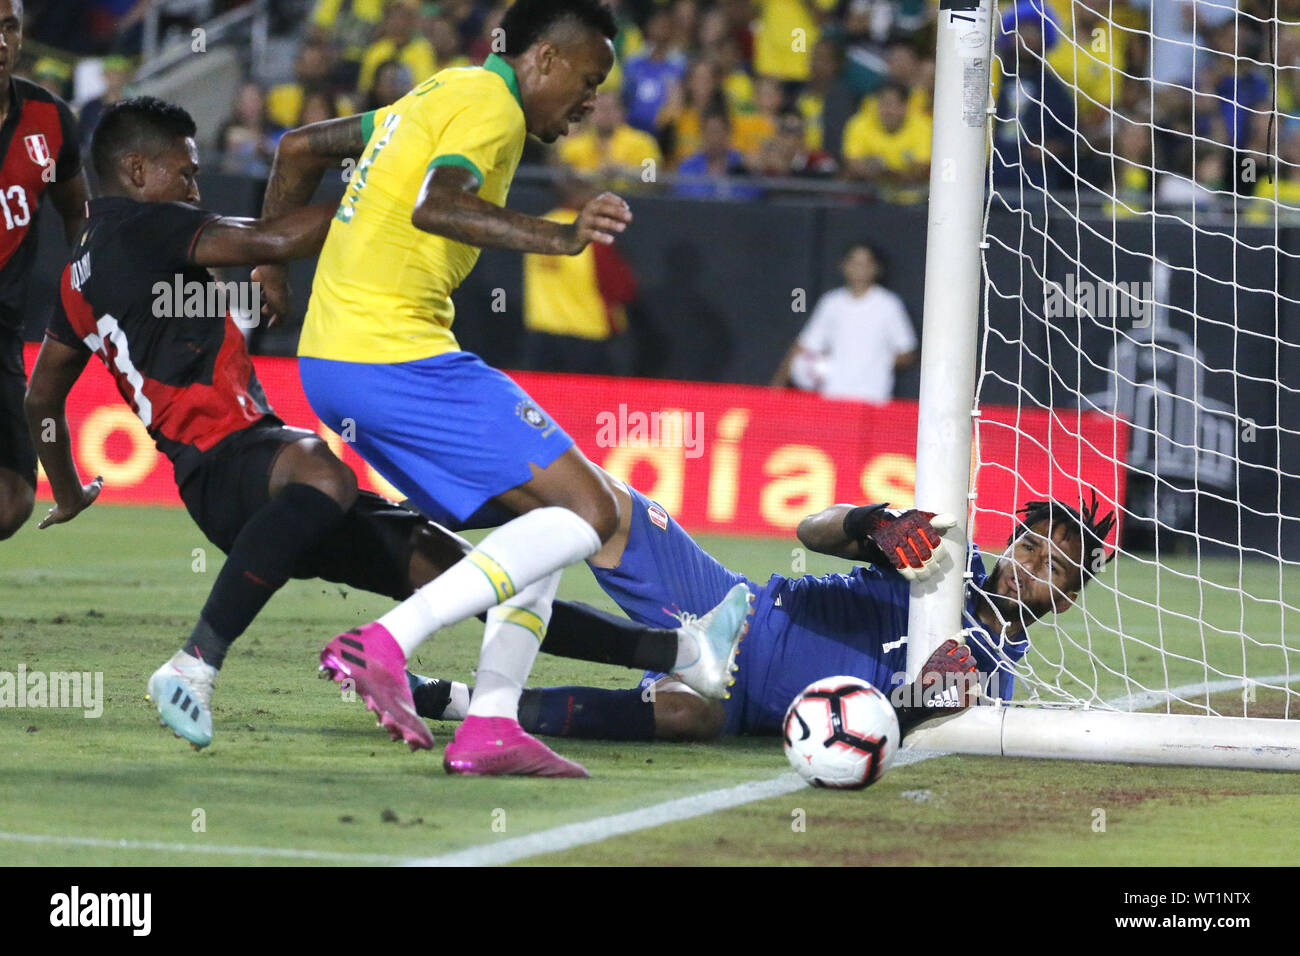 Los Angeles, California, USA. 10th Sep, 2019. Peru goalkeeper Pedro Gallese (1) and Peru midfielder Pedro Aquino (23) make save against Brazil defender Eder Militao (3) during an International Friendly Soccer match between Brazil and Peru at the Los Angeles Memorial Coliseum in Los Angeles on Tuesday, September 10, 2019. Credit: Ringo Chiu/ZUMA Wire/Alamy Live News Stock Photo